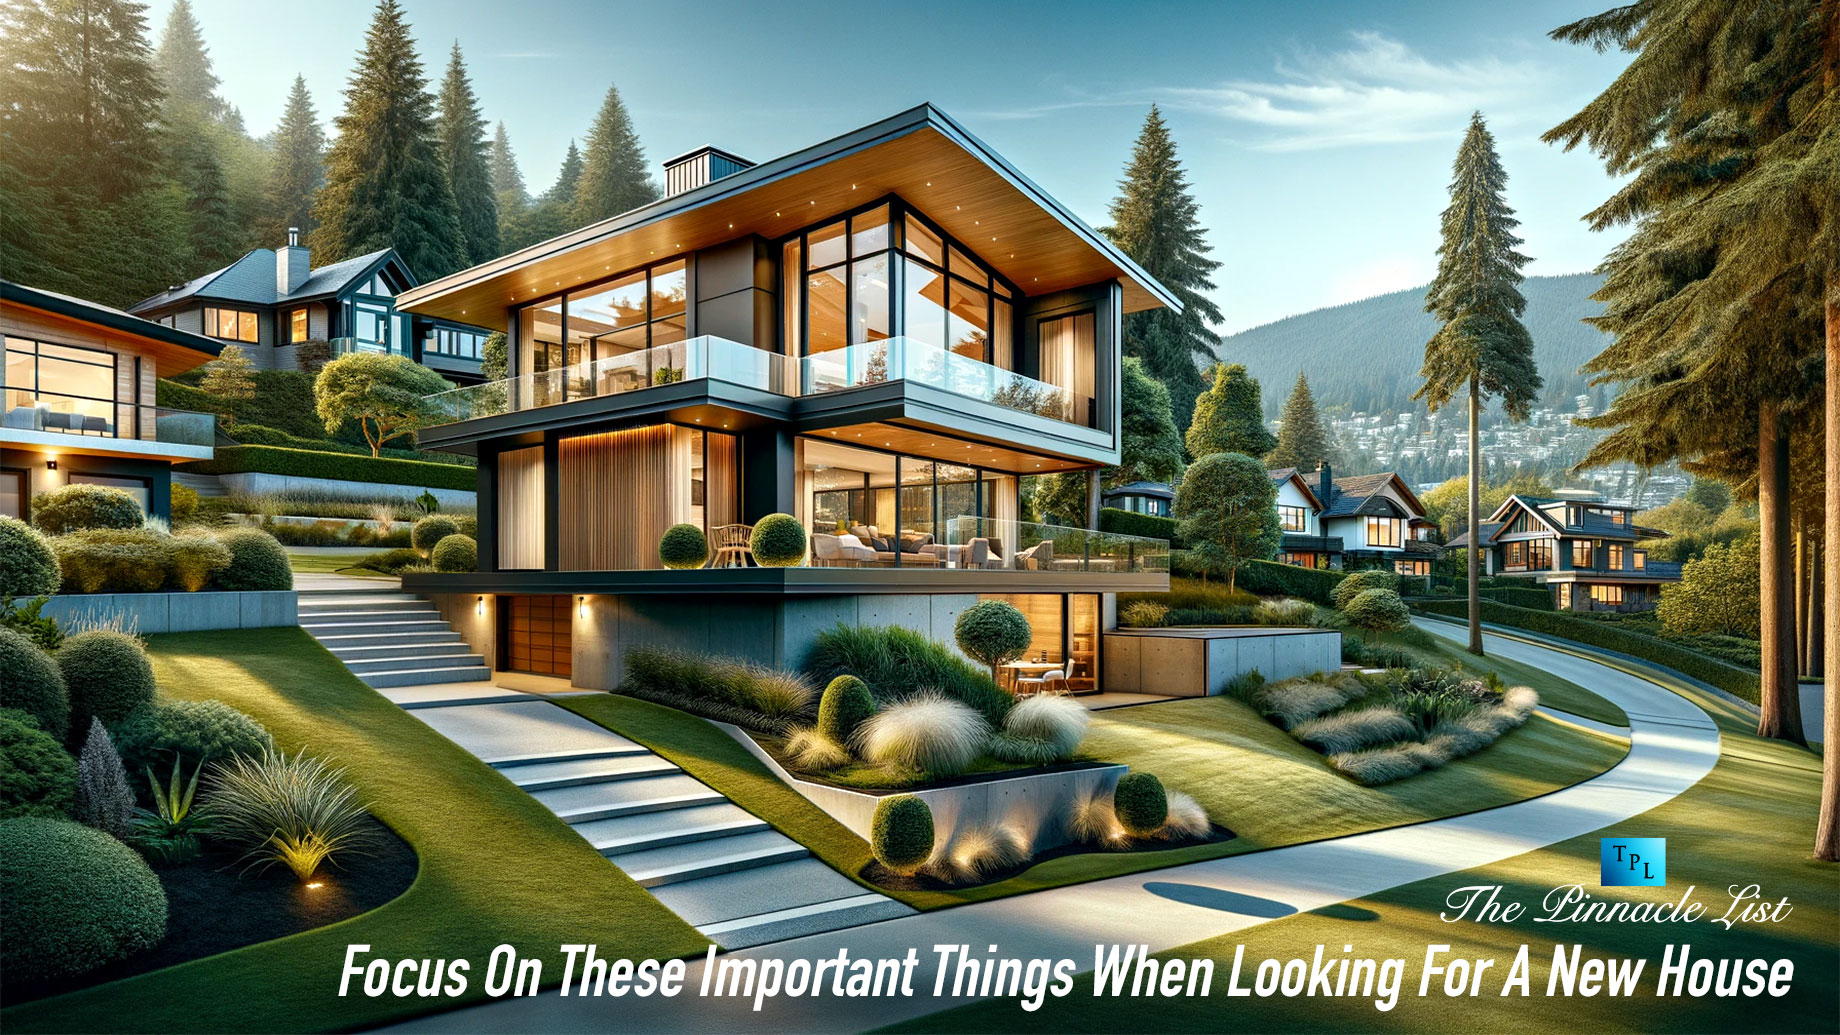 Focus On These Important Things When Looking For A New House